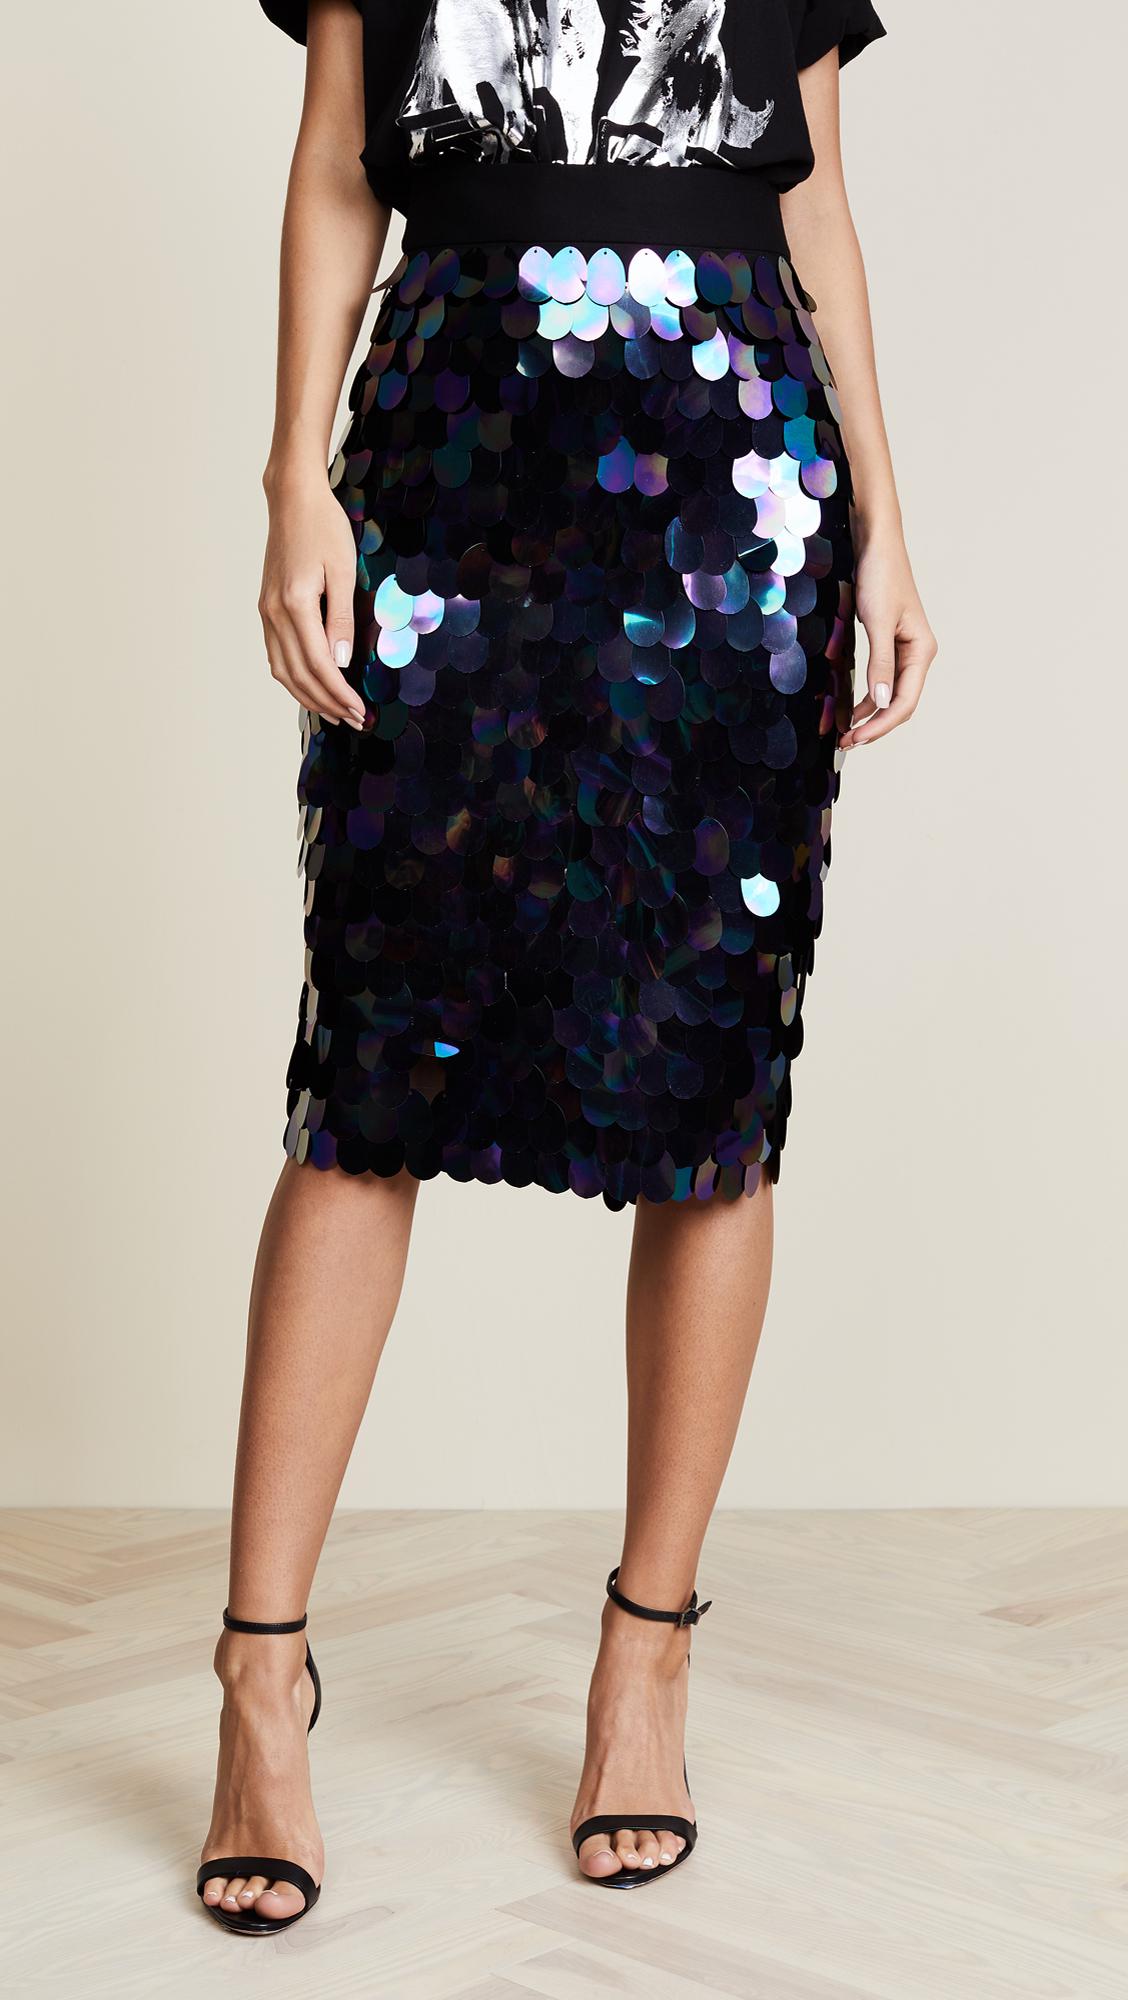 Lyst Milly Paillette Sequin Midi Skirt In Blue 591